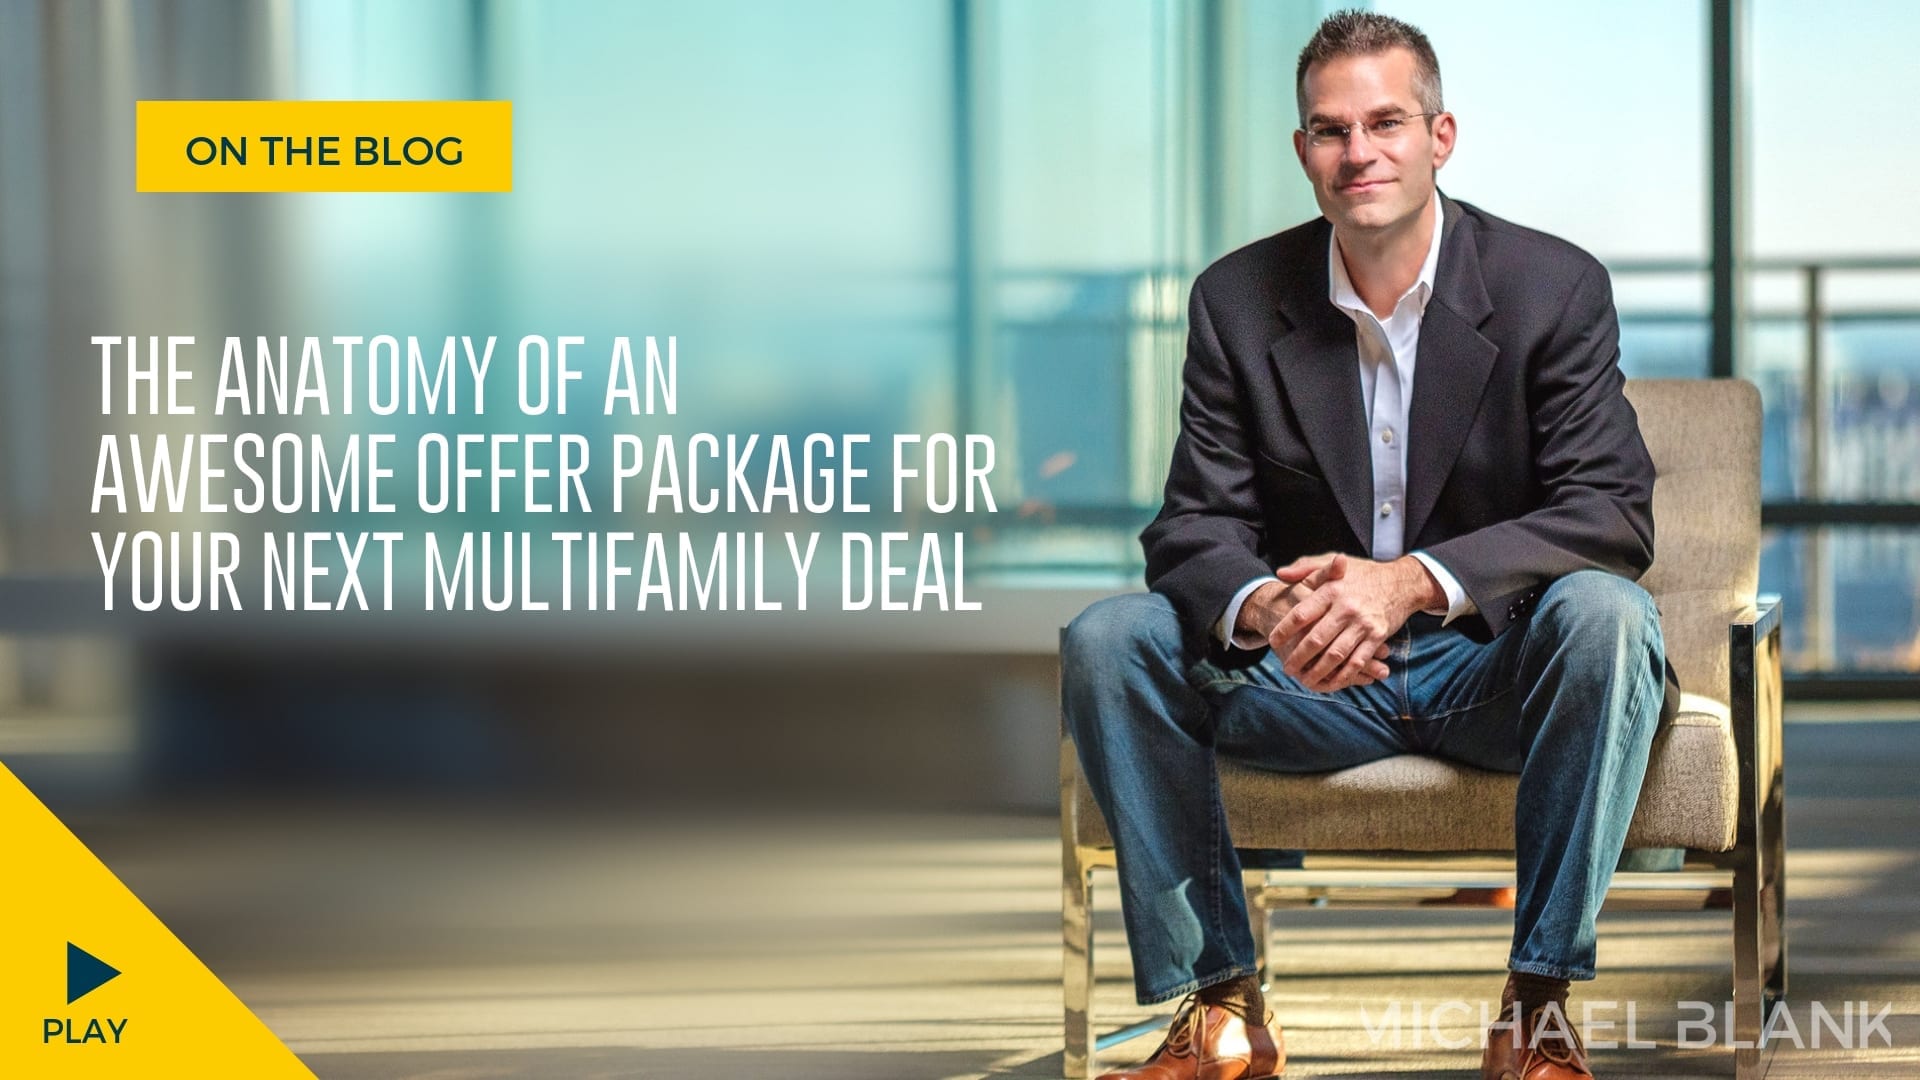 The Anatomy of an Awesome Offer Package for Your Next Multifamily Deal